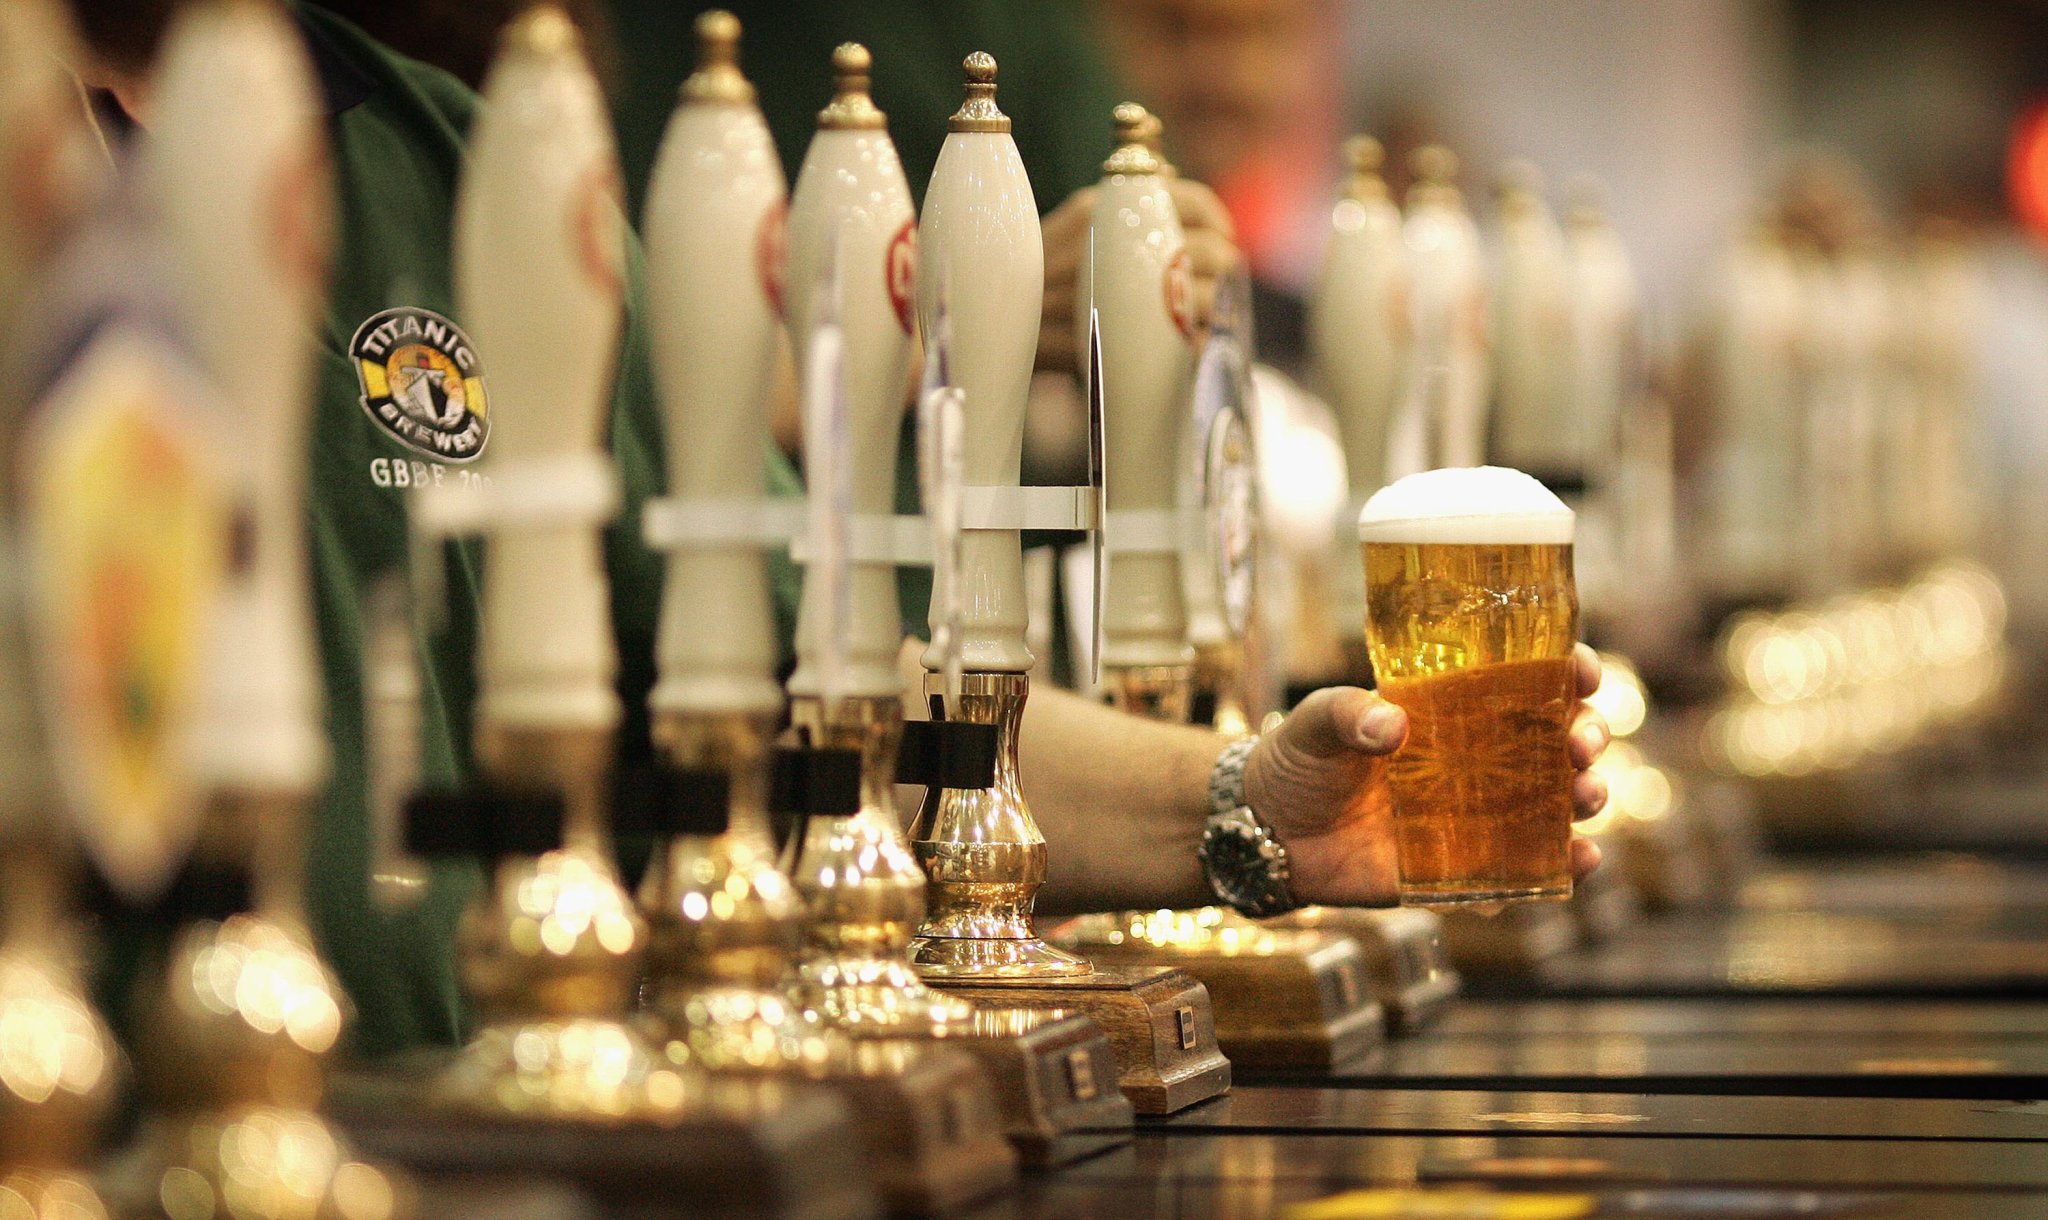 Beers in tiers: The new tier rules to stick to when pubs reopen next week